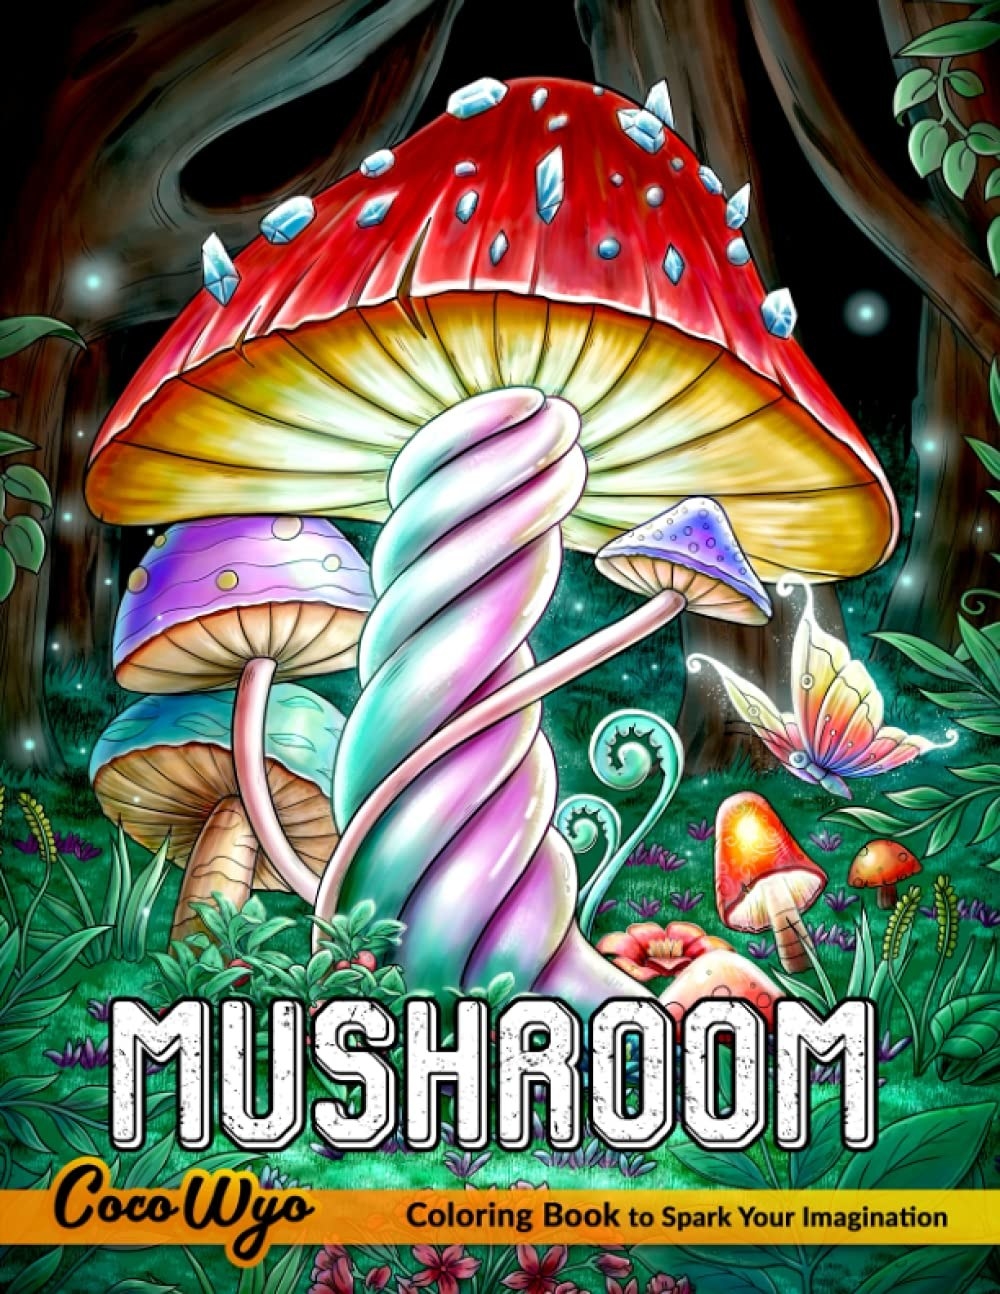 The front cover of the mushroom colouring book